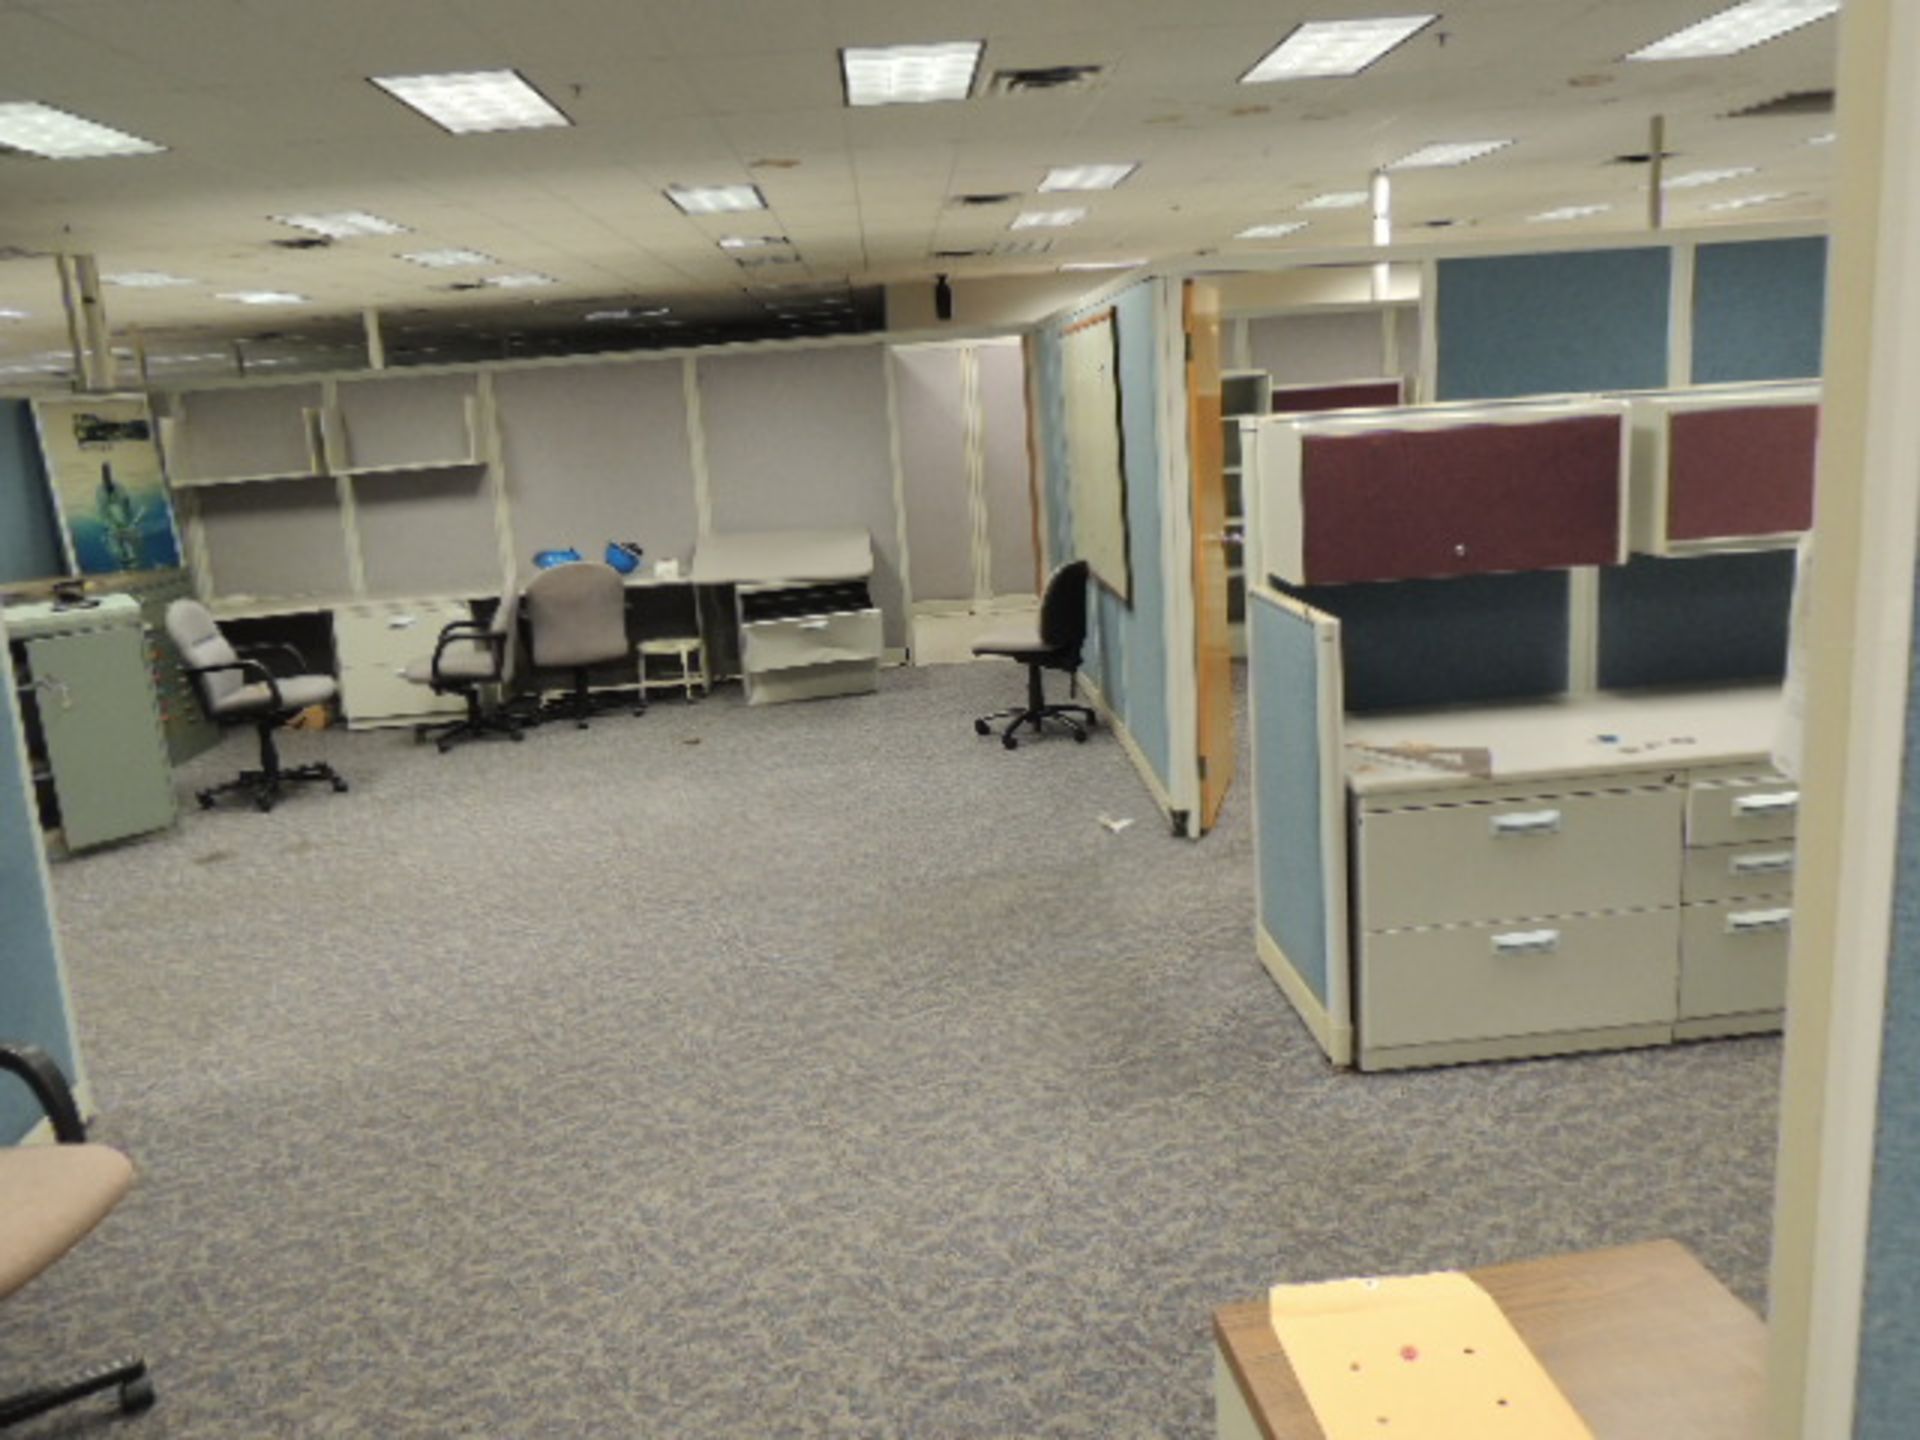 Office Cubicles & Contents. Lot: (8) offices w/ wooden and metal desks, file cabinets and lateral - Image 44 of 47